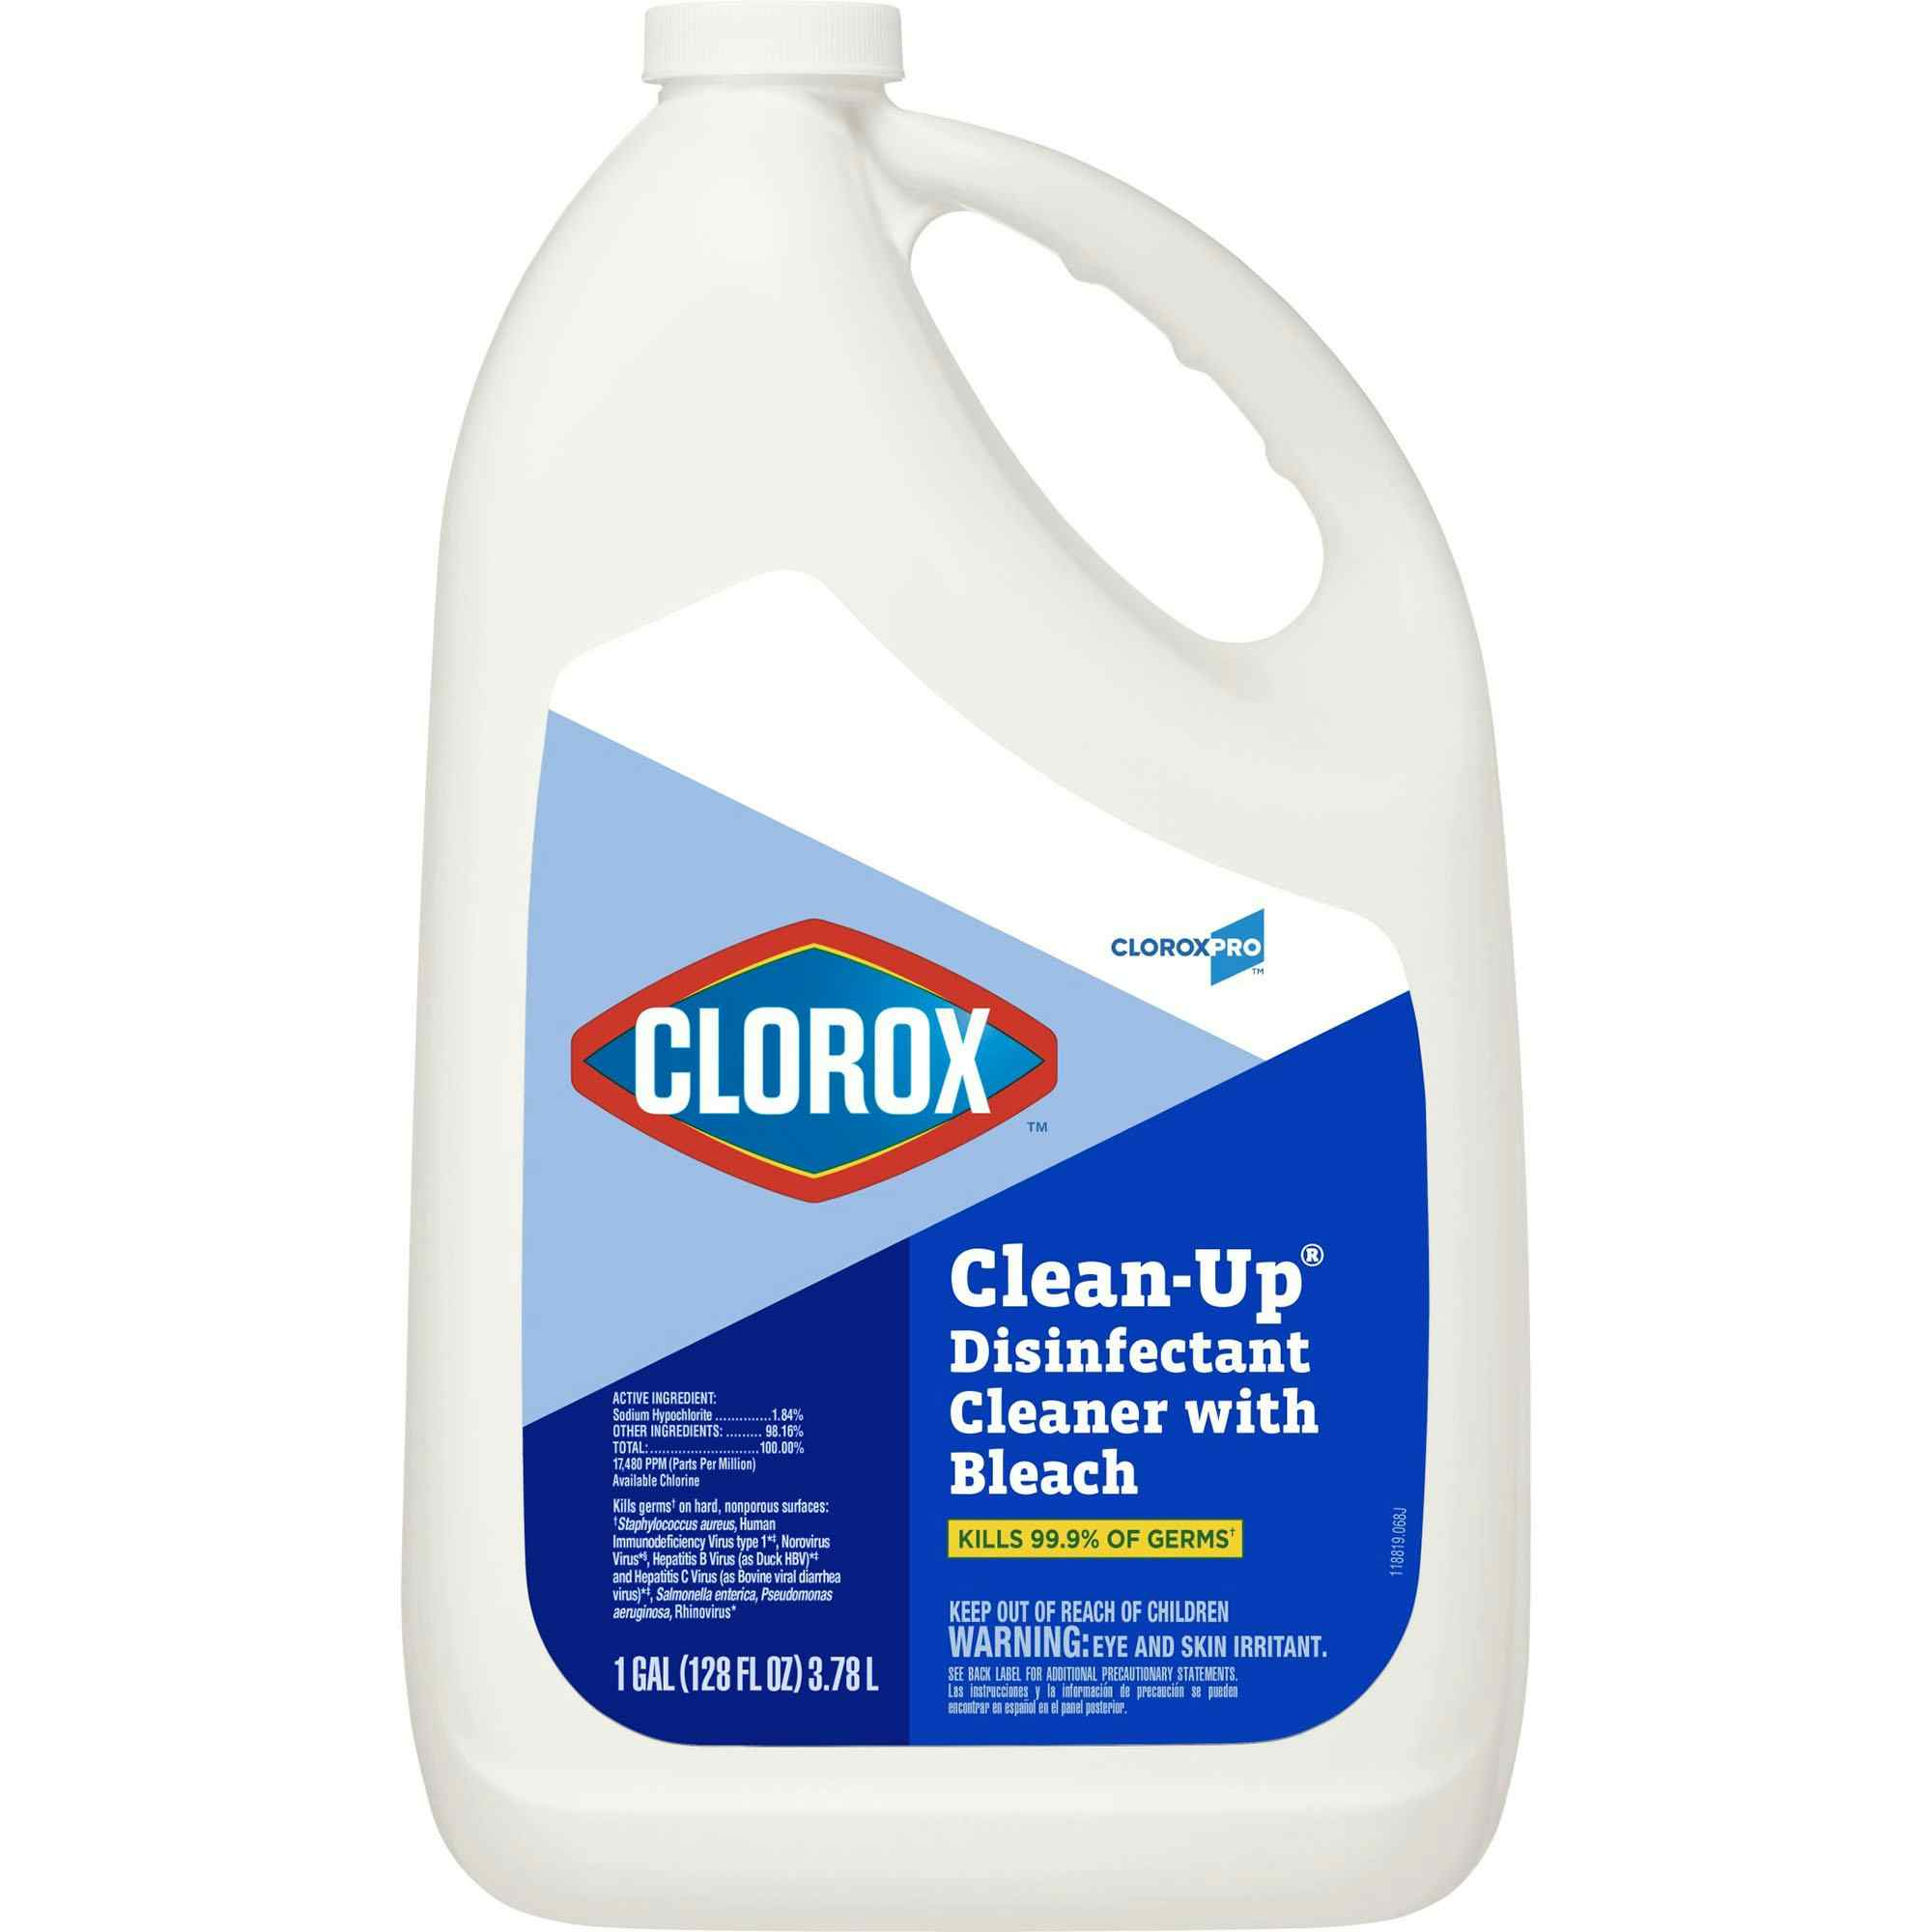 Clorox Clean-Up Disinfectant Cleaner with Bleach, 1 gal.